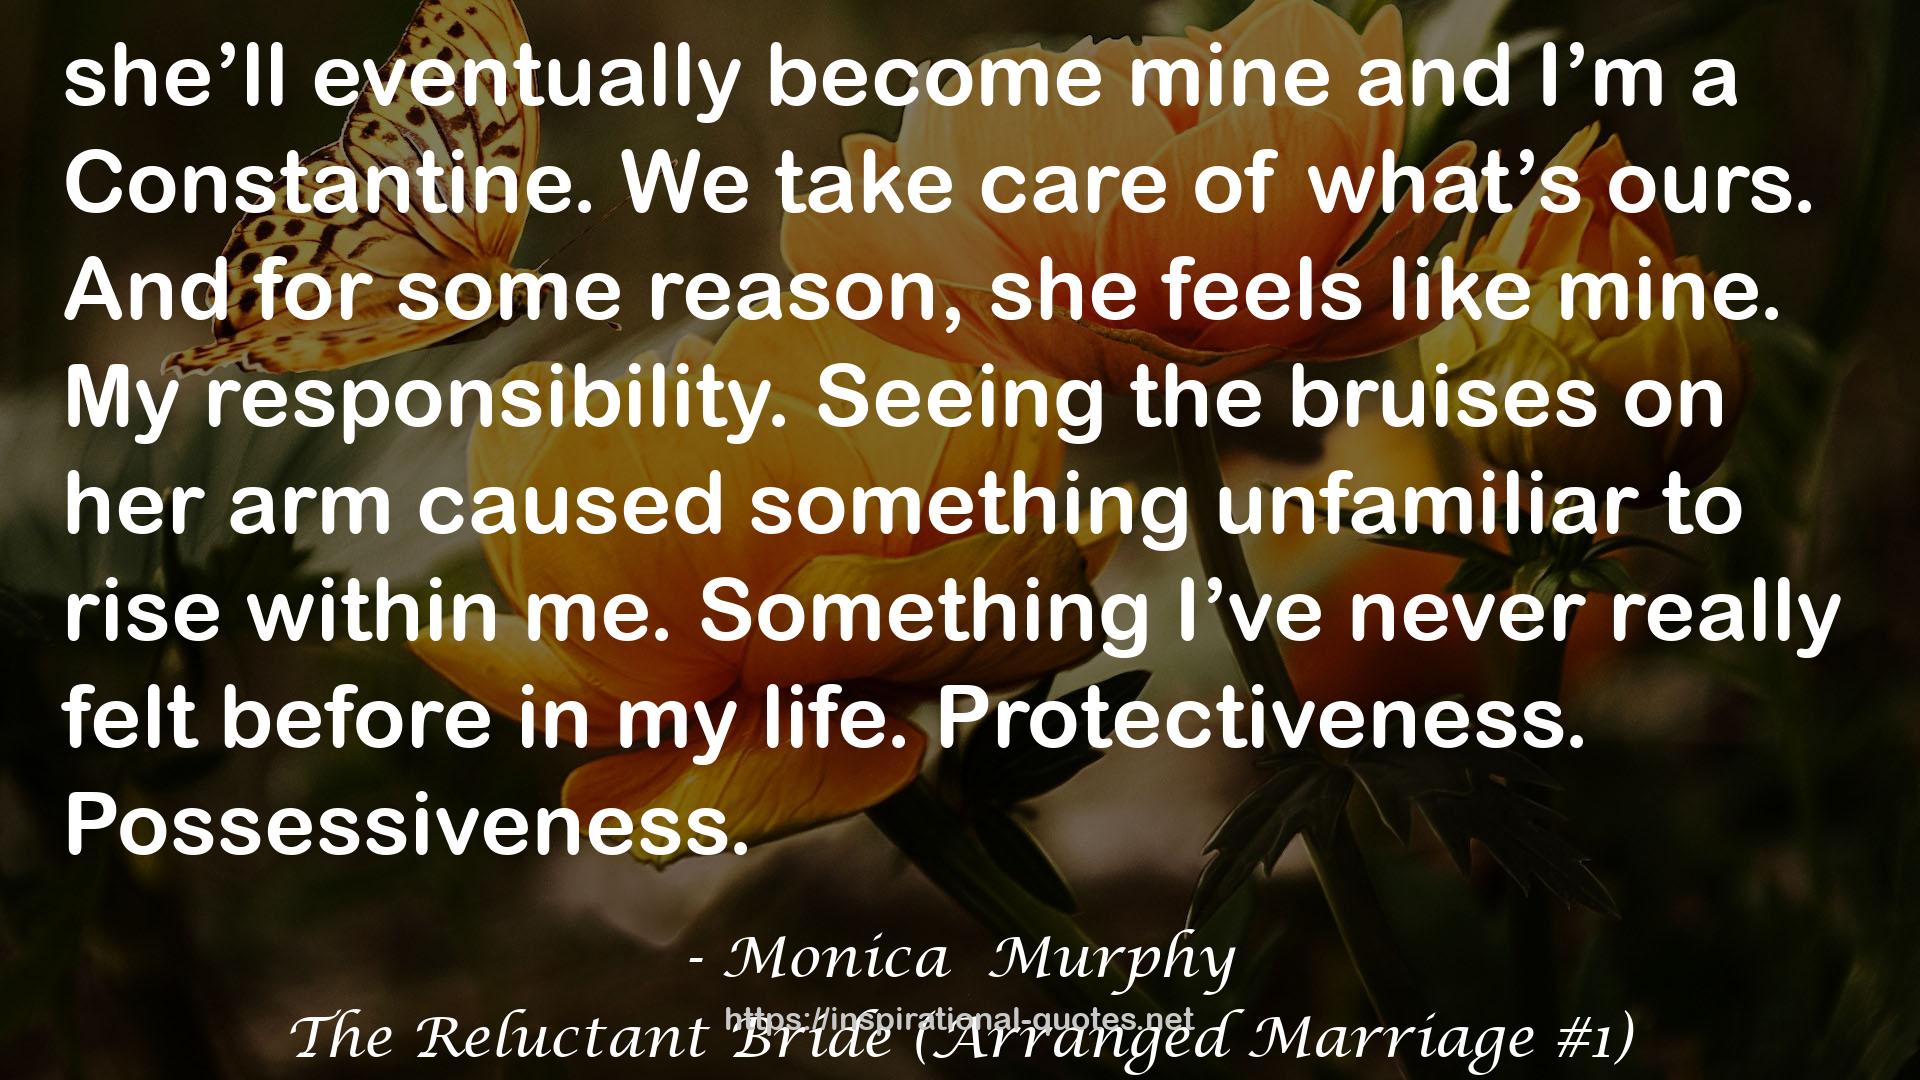 The Reluctant Bride (Arranged Marriage #1) QUOTES